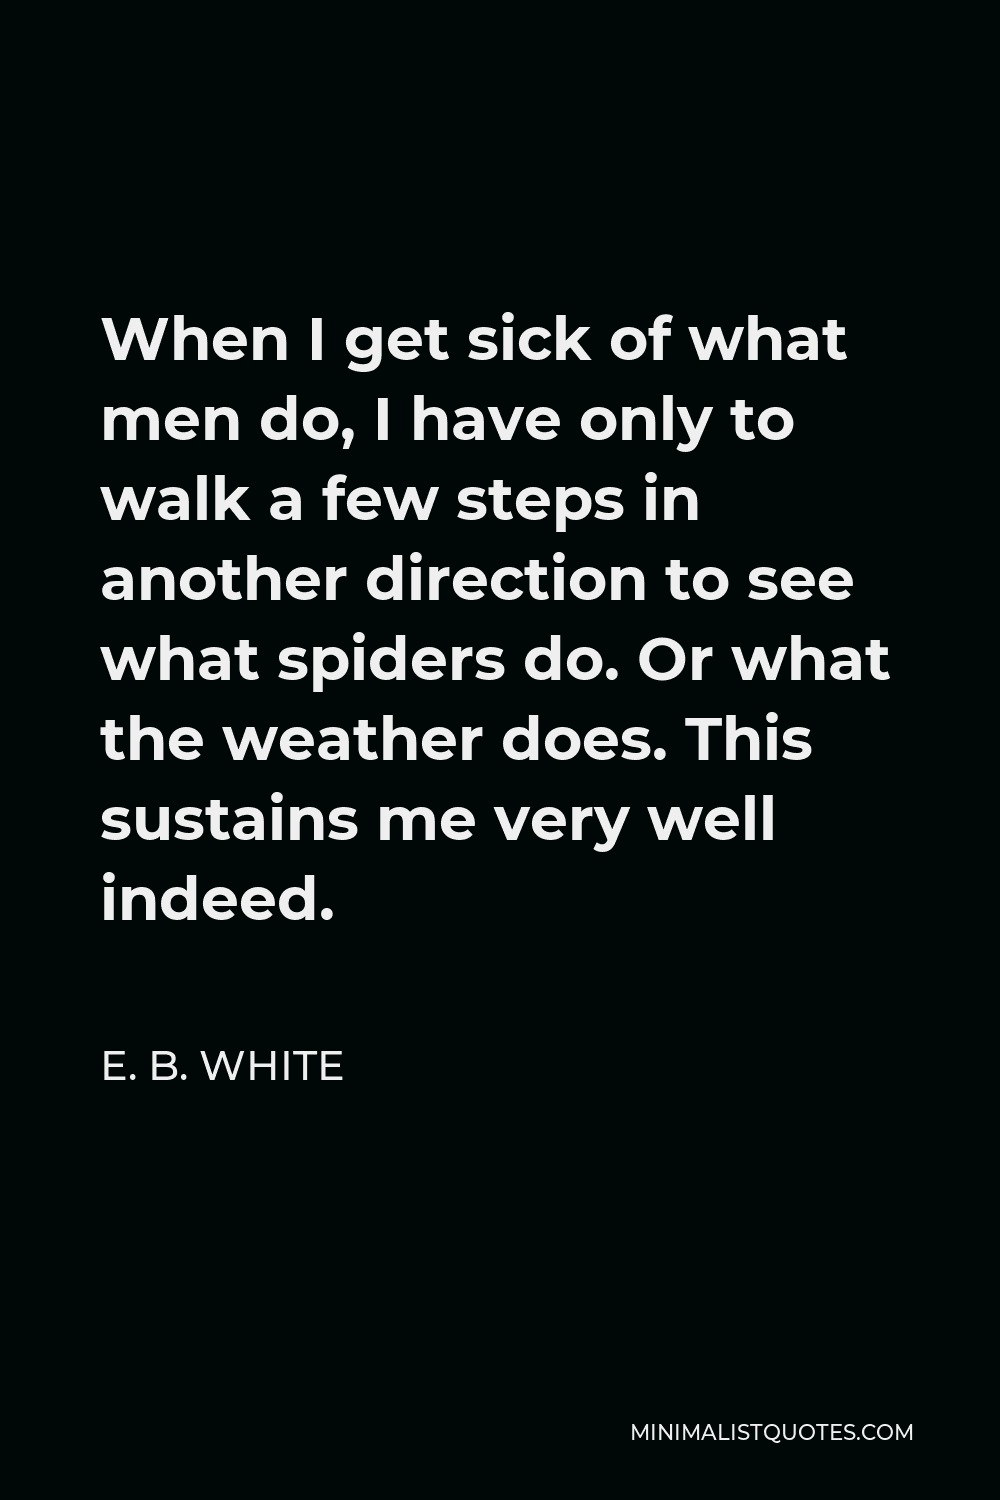 E. B. White Quote - When I get sick of what men do, I have only to walk a few steps in another direction to see what spiders do. Or what the weather does. This sustains me very well indeed.